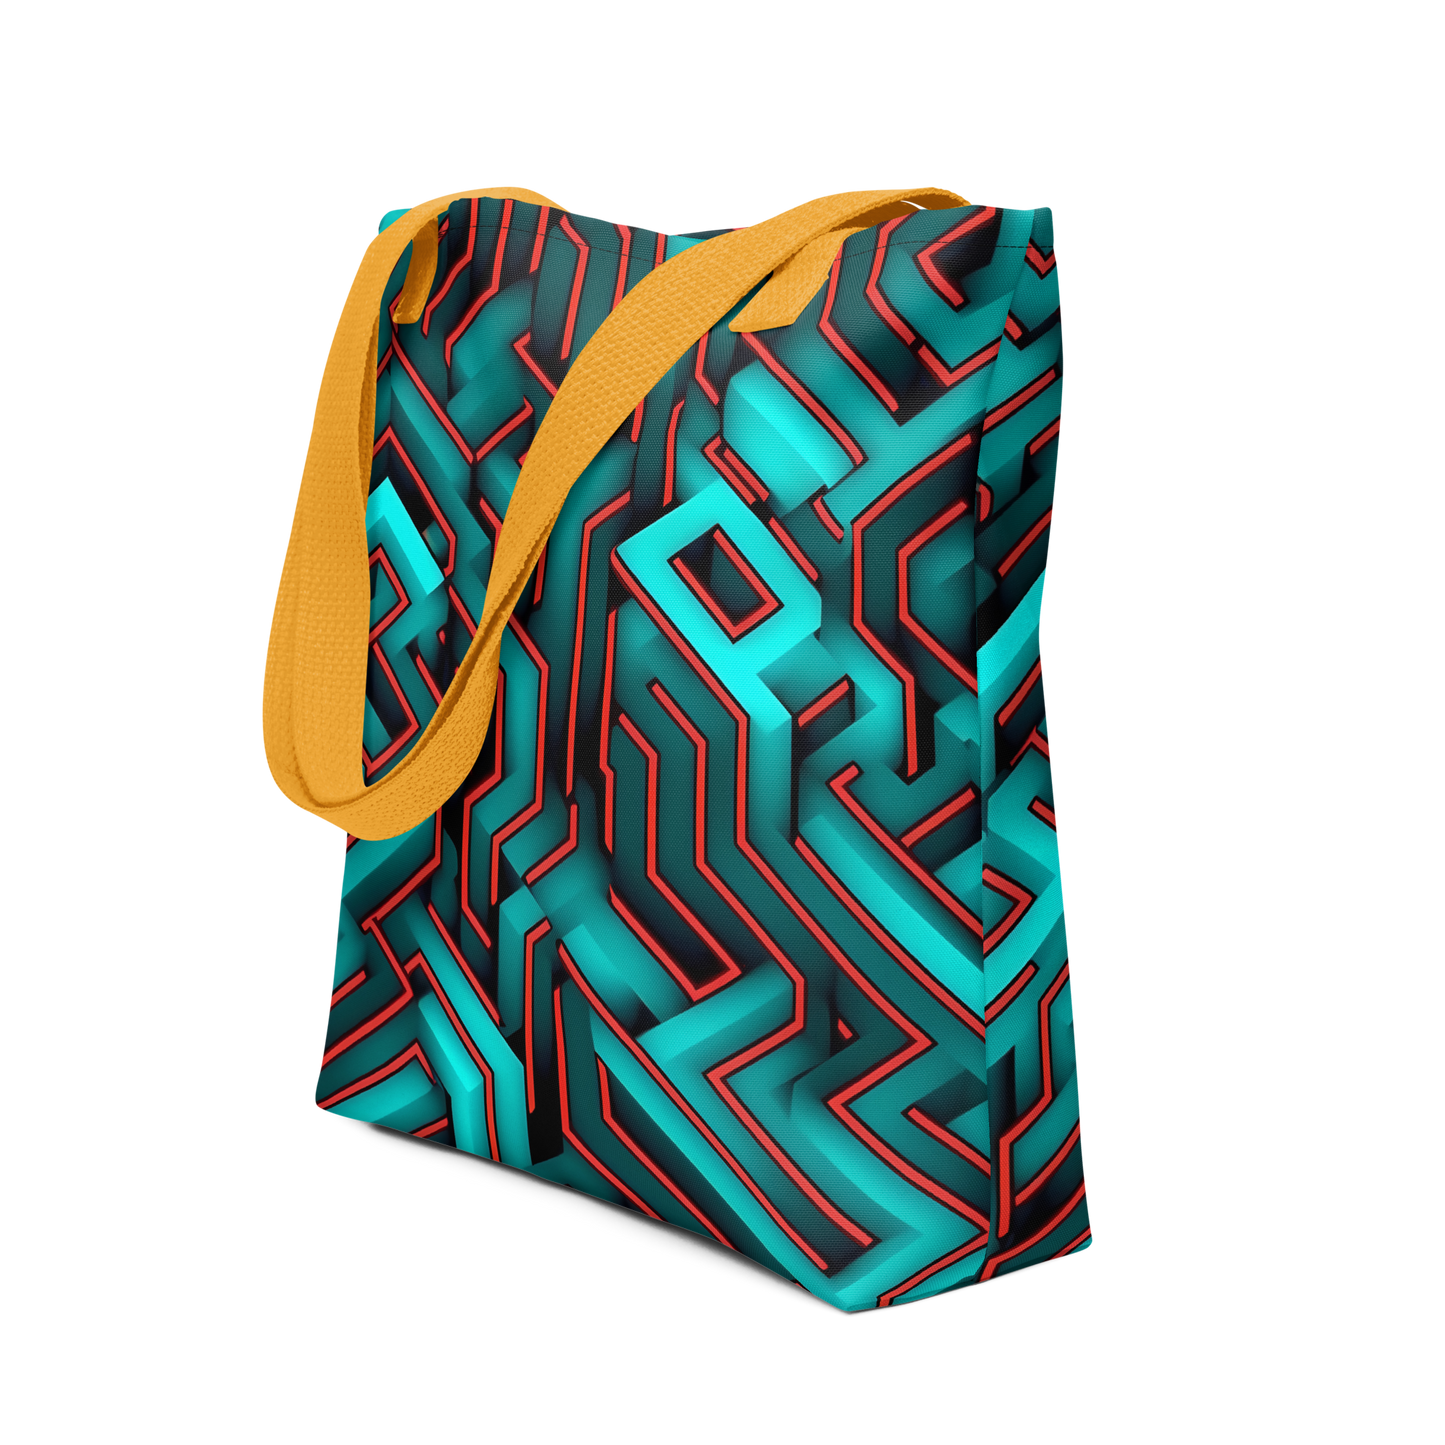 3D Maze Illusion | 3D Patterns | All-Over Print Tote - #2